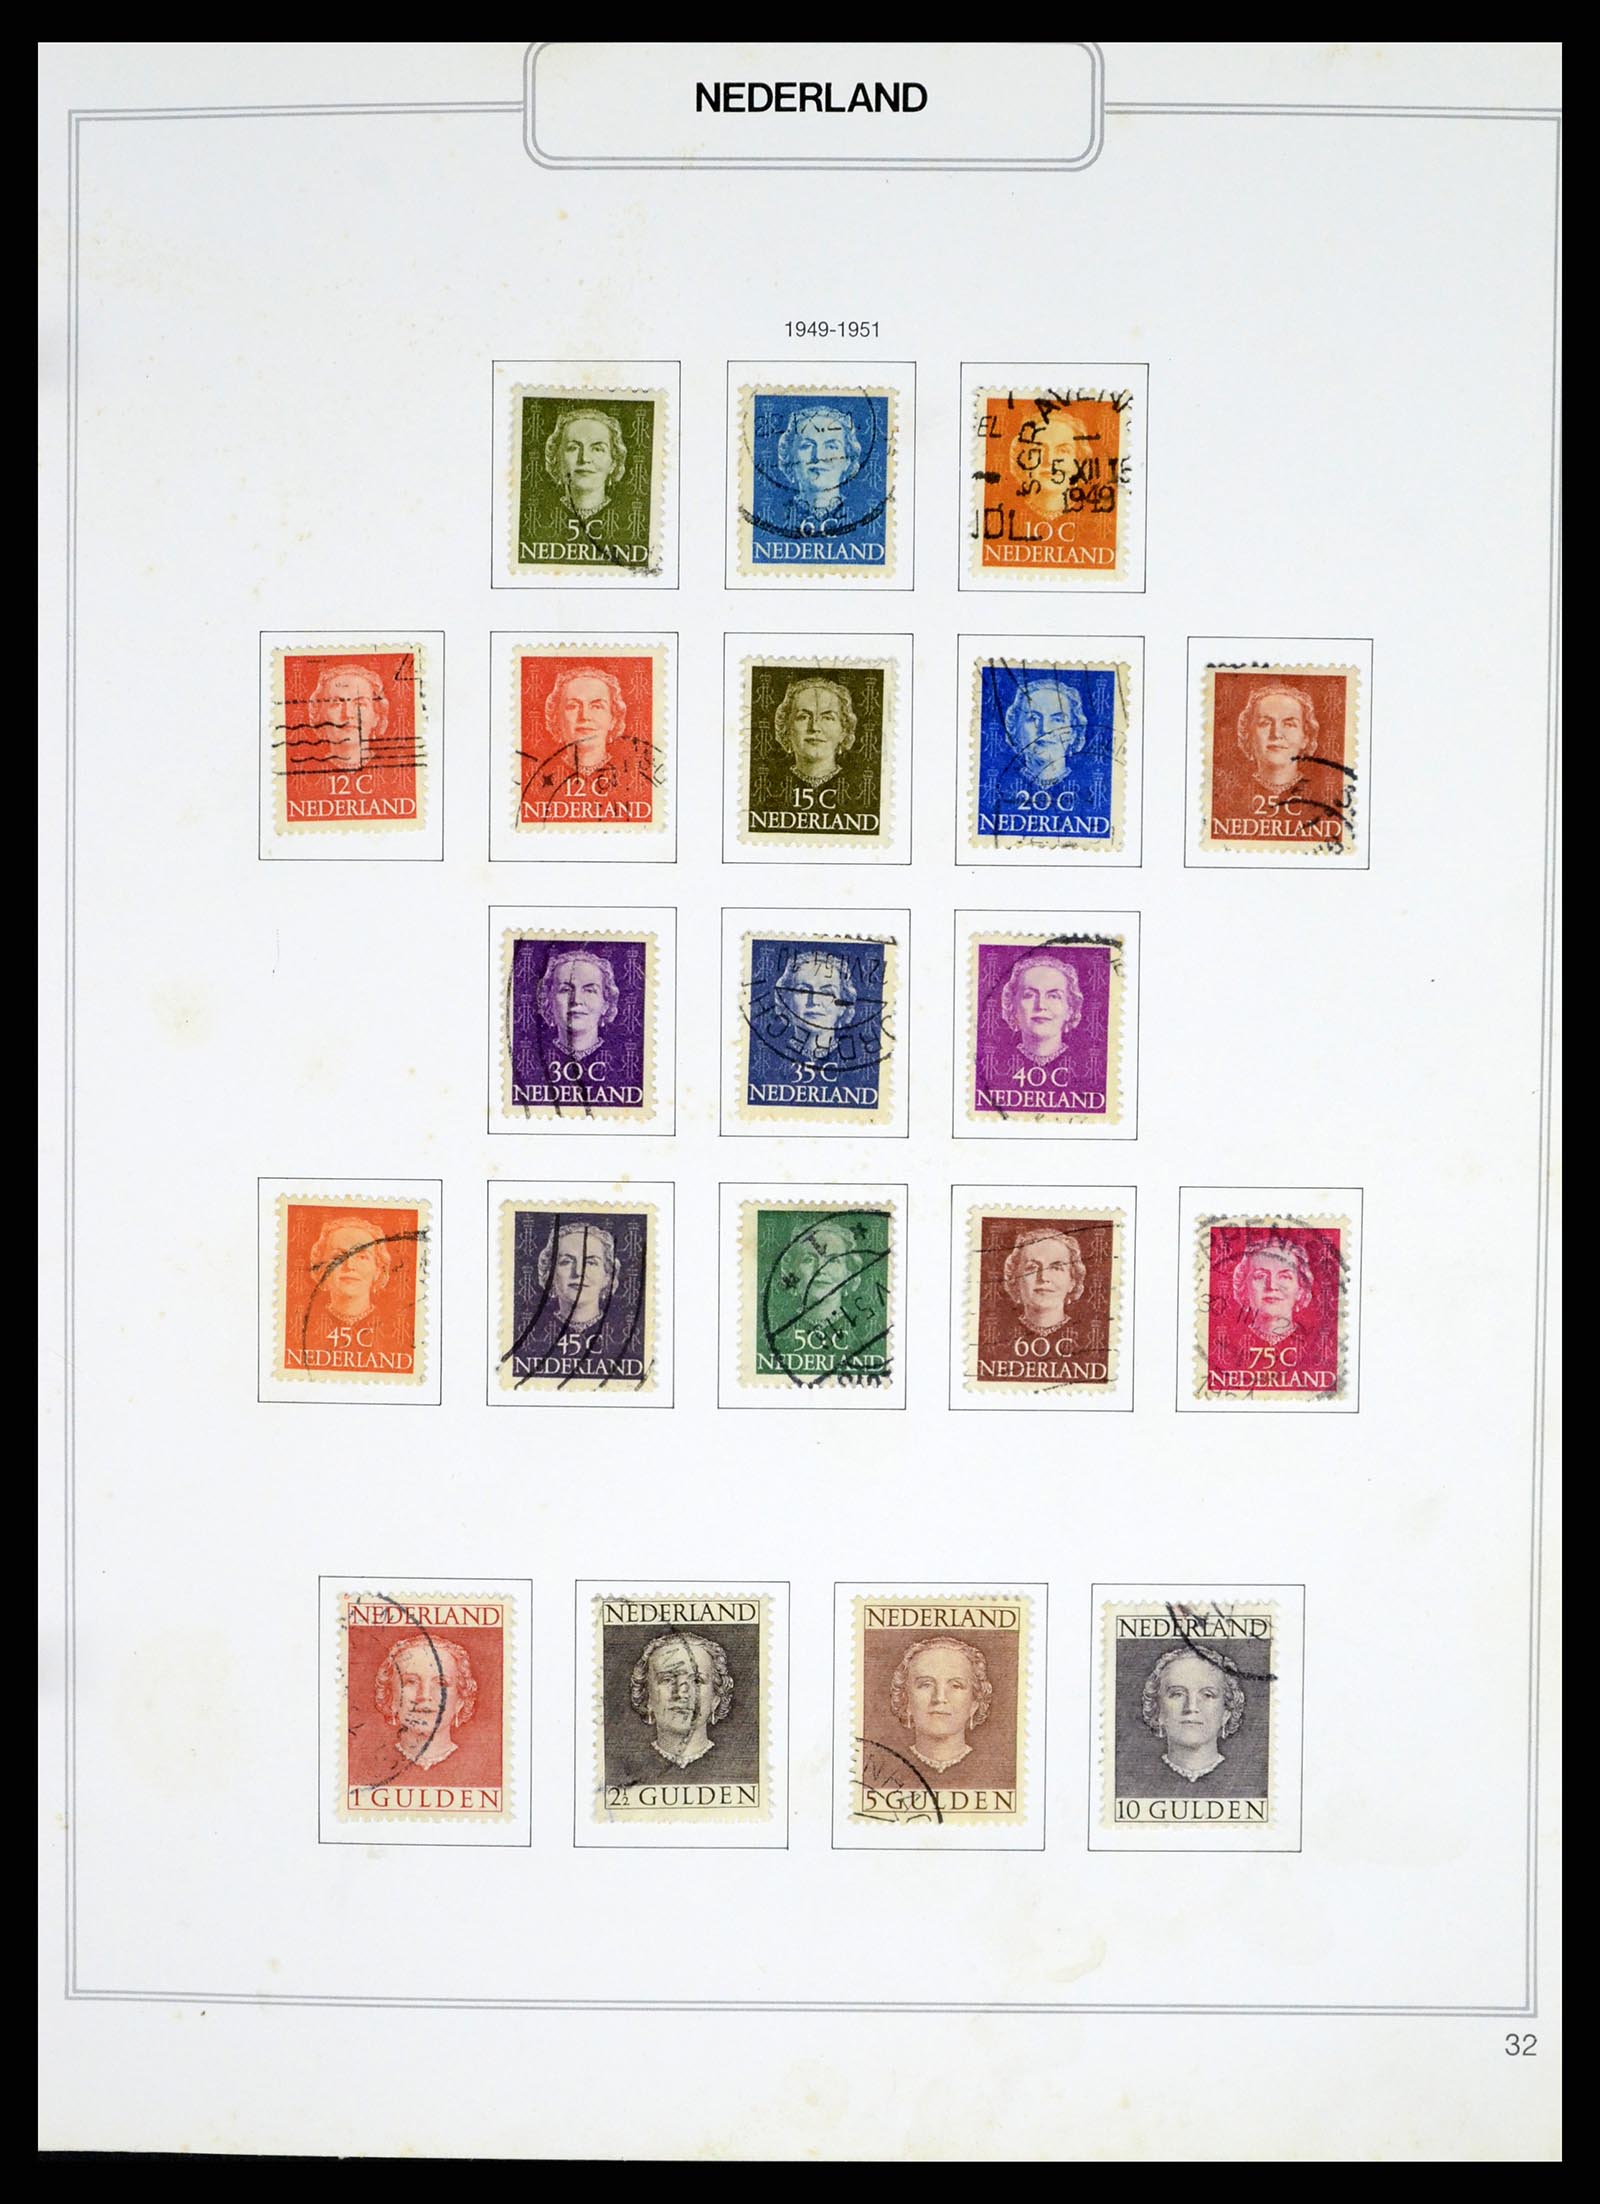 37348 032 - Stamp collection 37348 Netherlands 1852-1995.